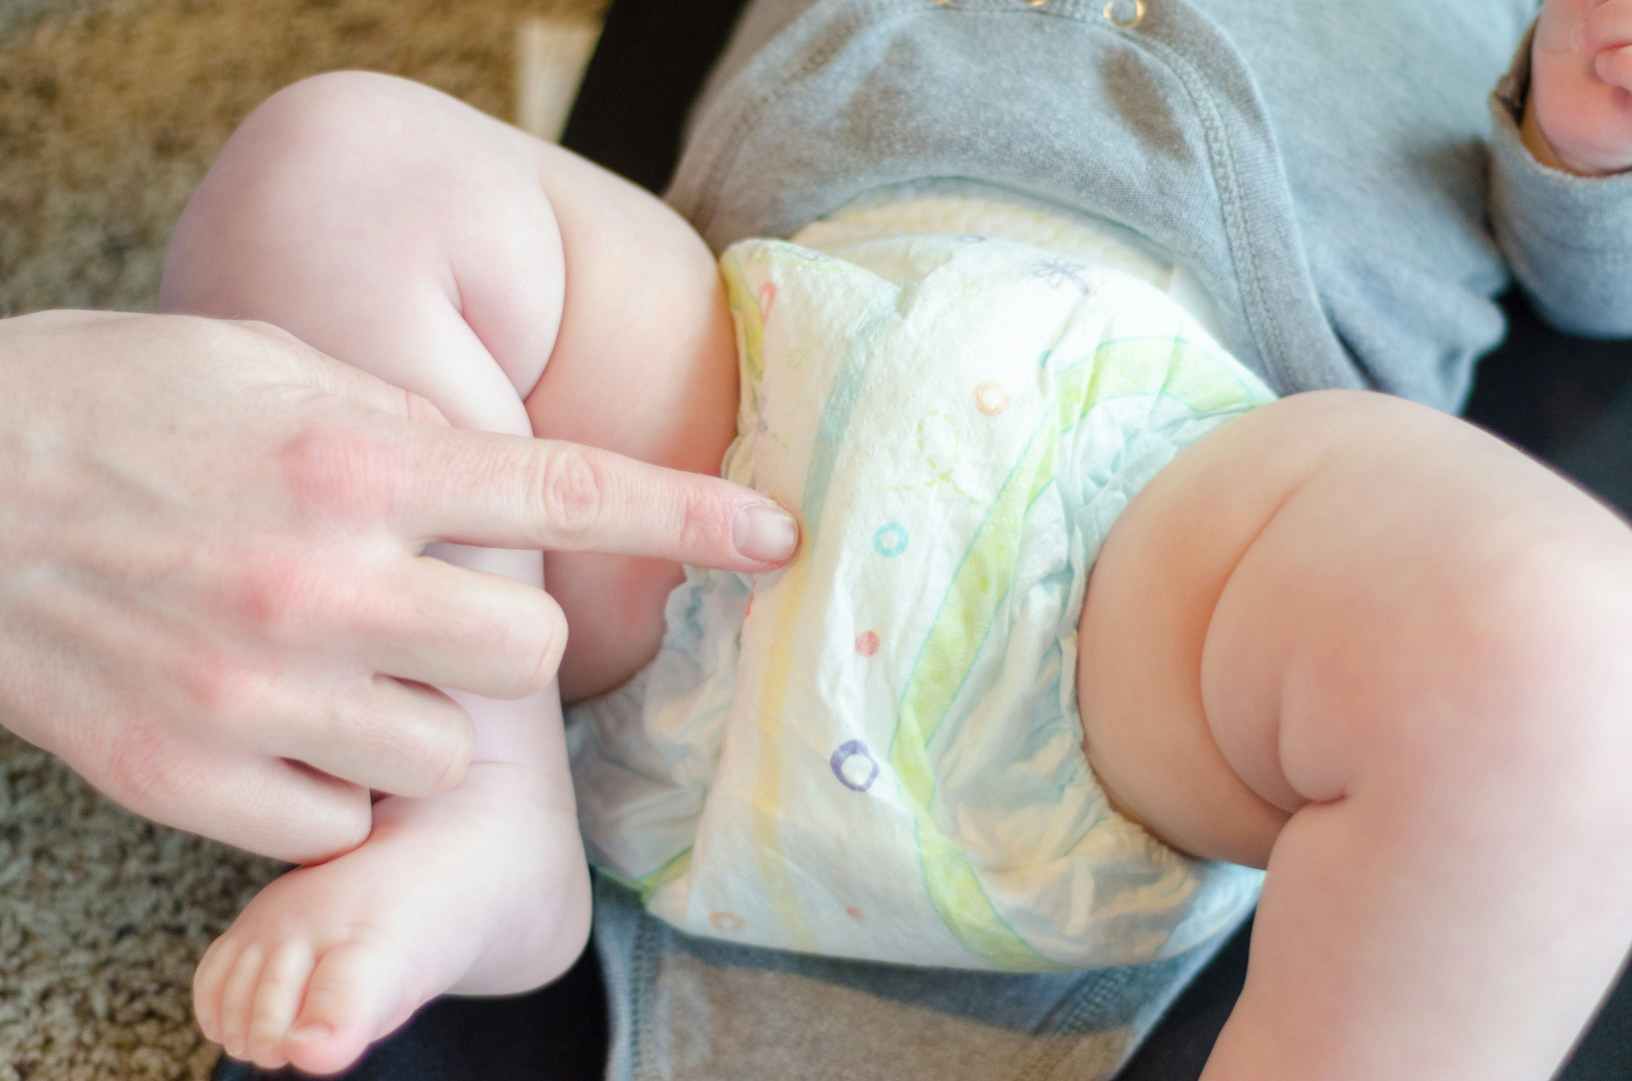 pointing to wet indicator line on baby's diaper